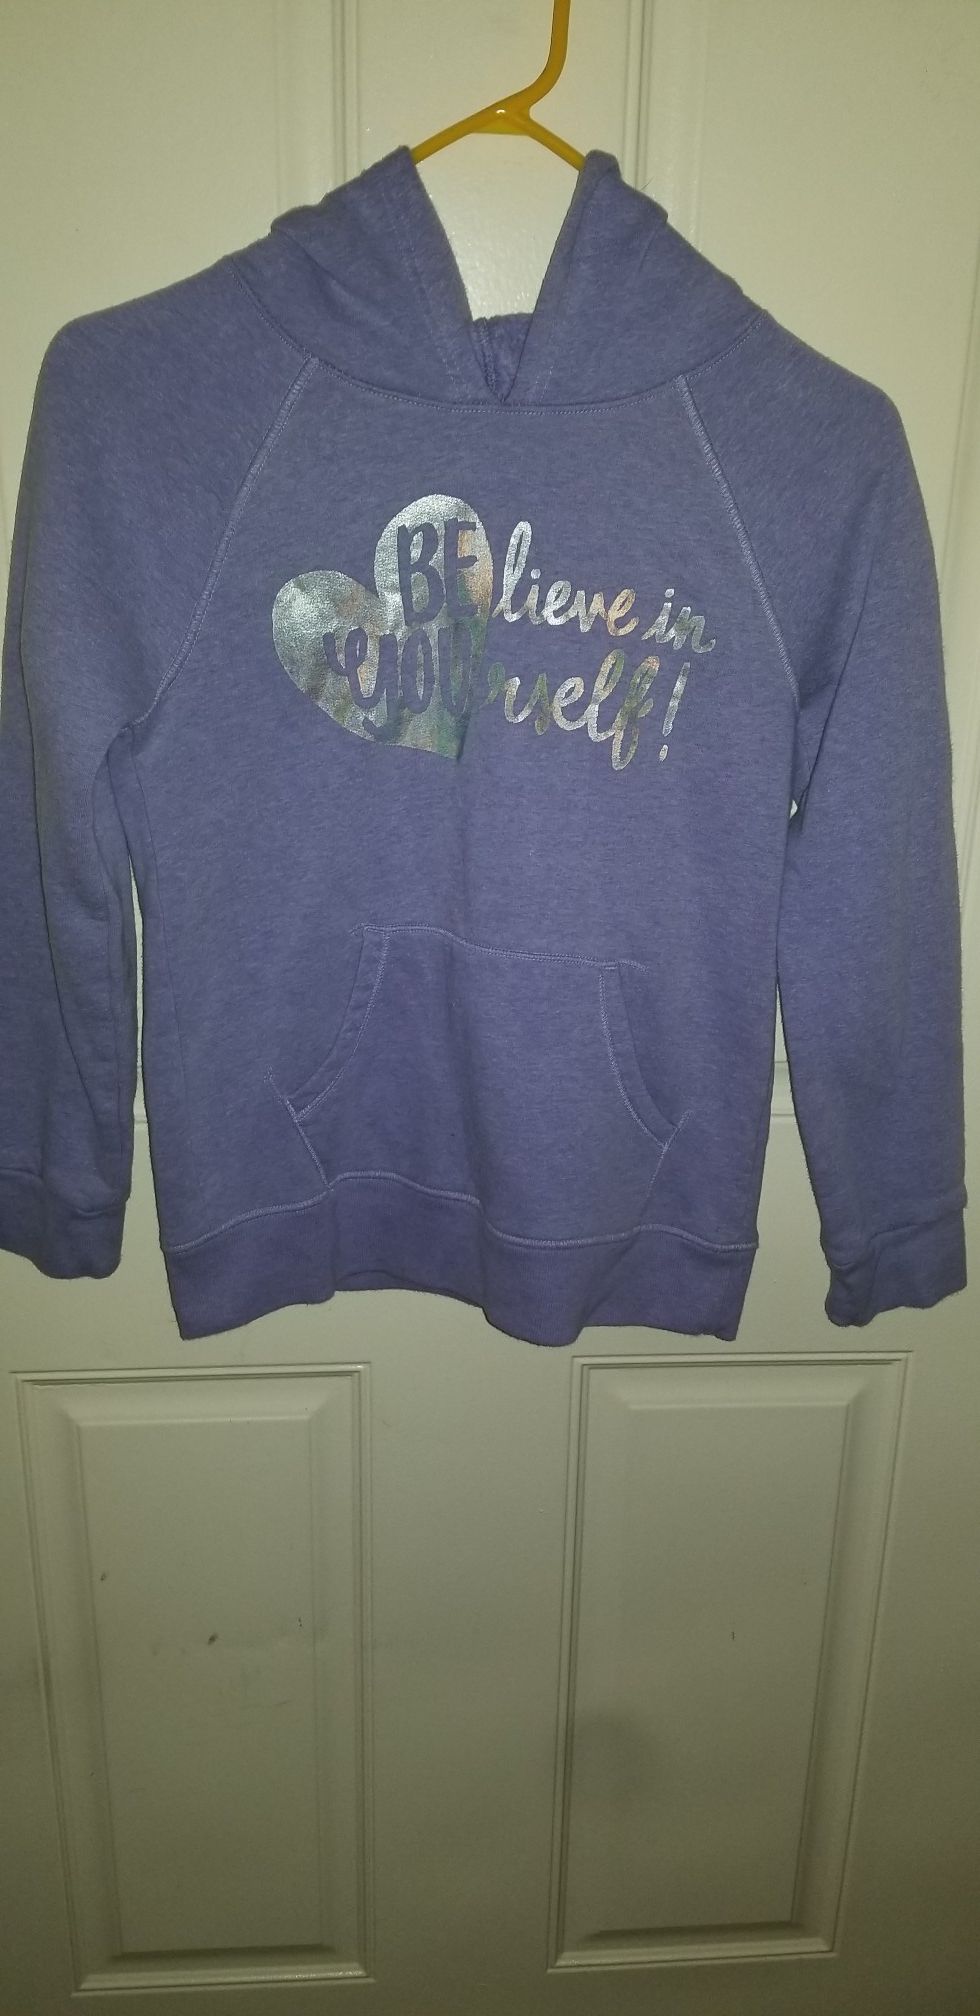 Believe In Yourself Hoodie Brand Cat & Jack Size Large 10/12